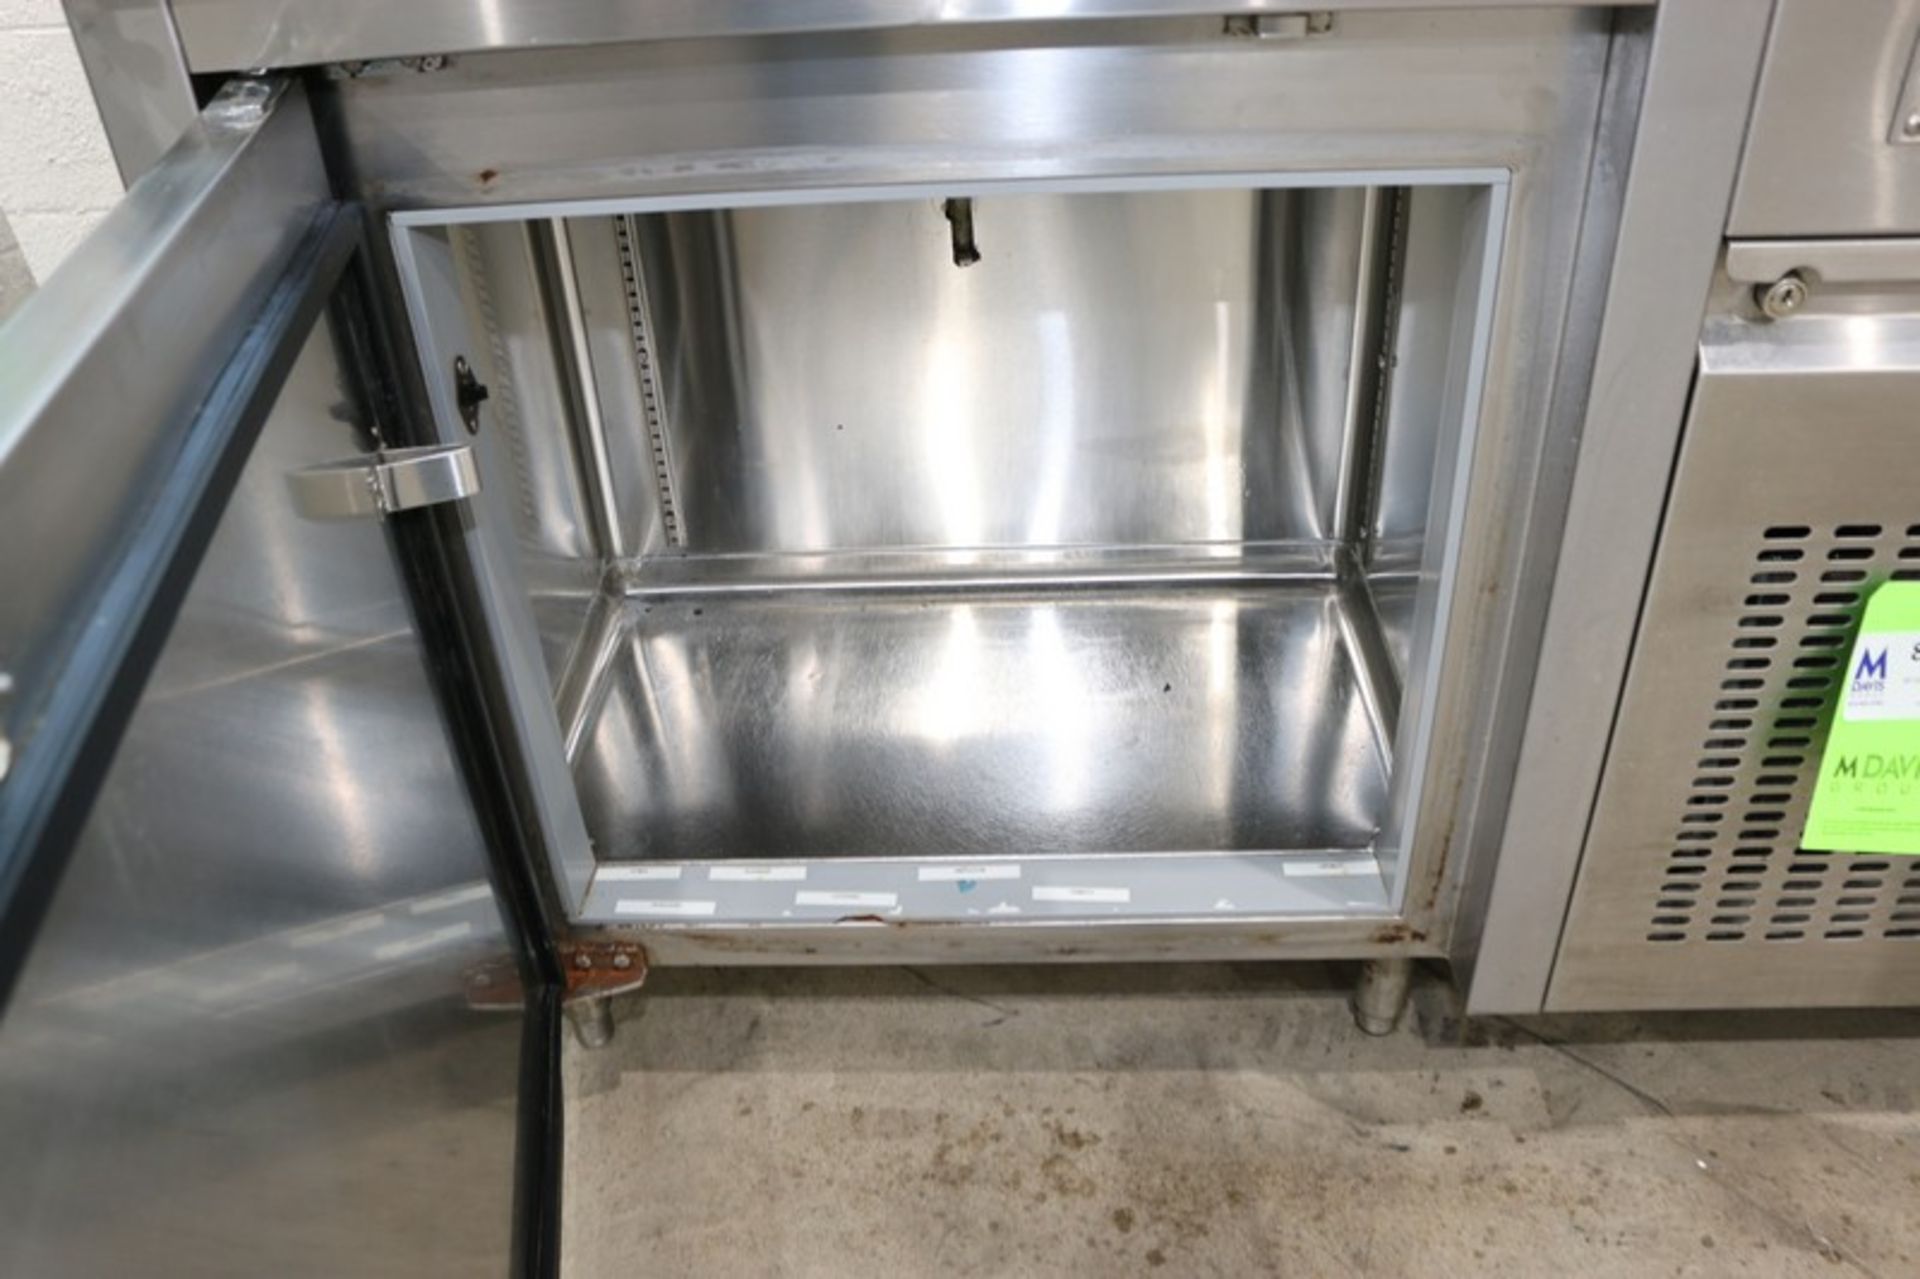 Carbone S/S Refrigerator Counter,with Bottom Refrigerator Compartment, Overall Dims.: Aprox. 48" L x - Bild 3 aus 4